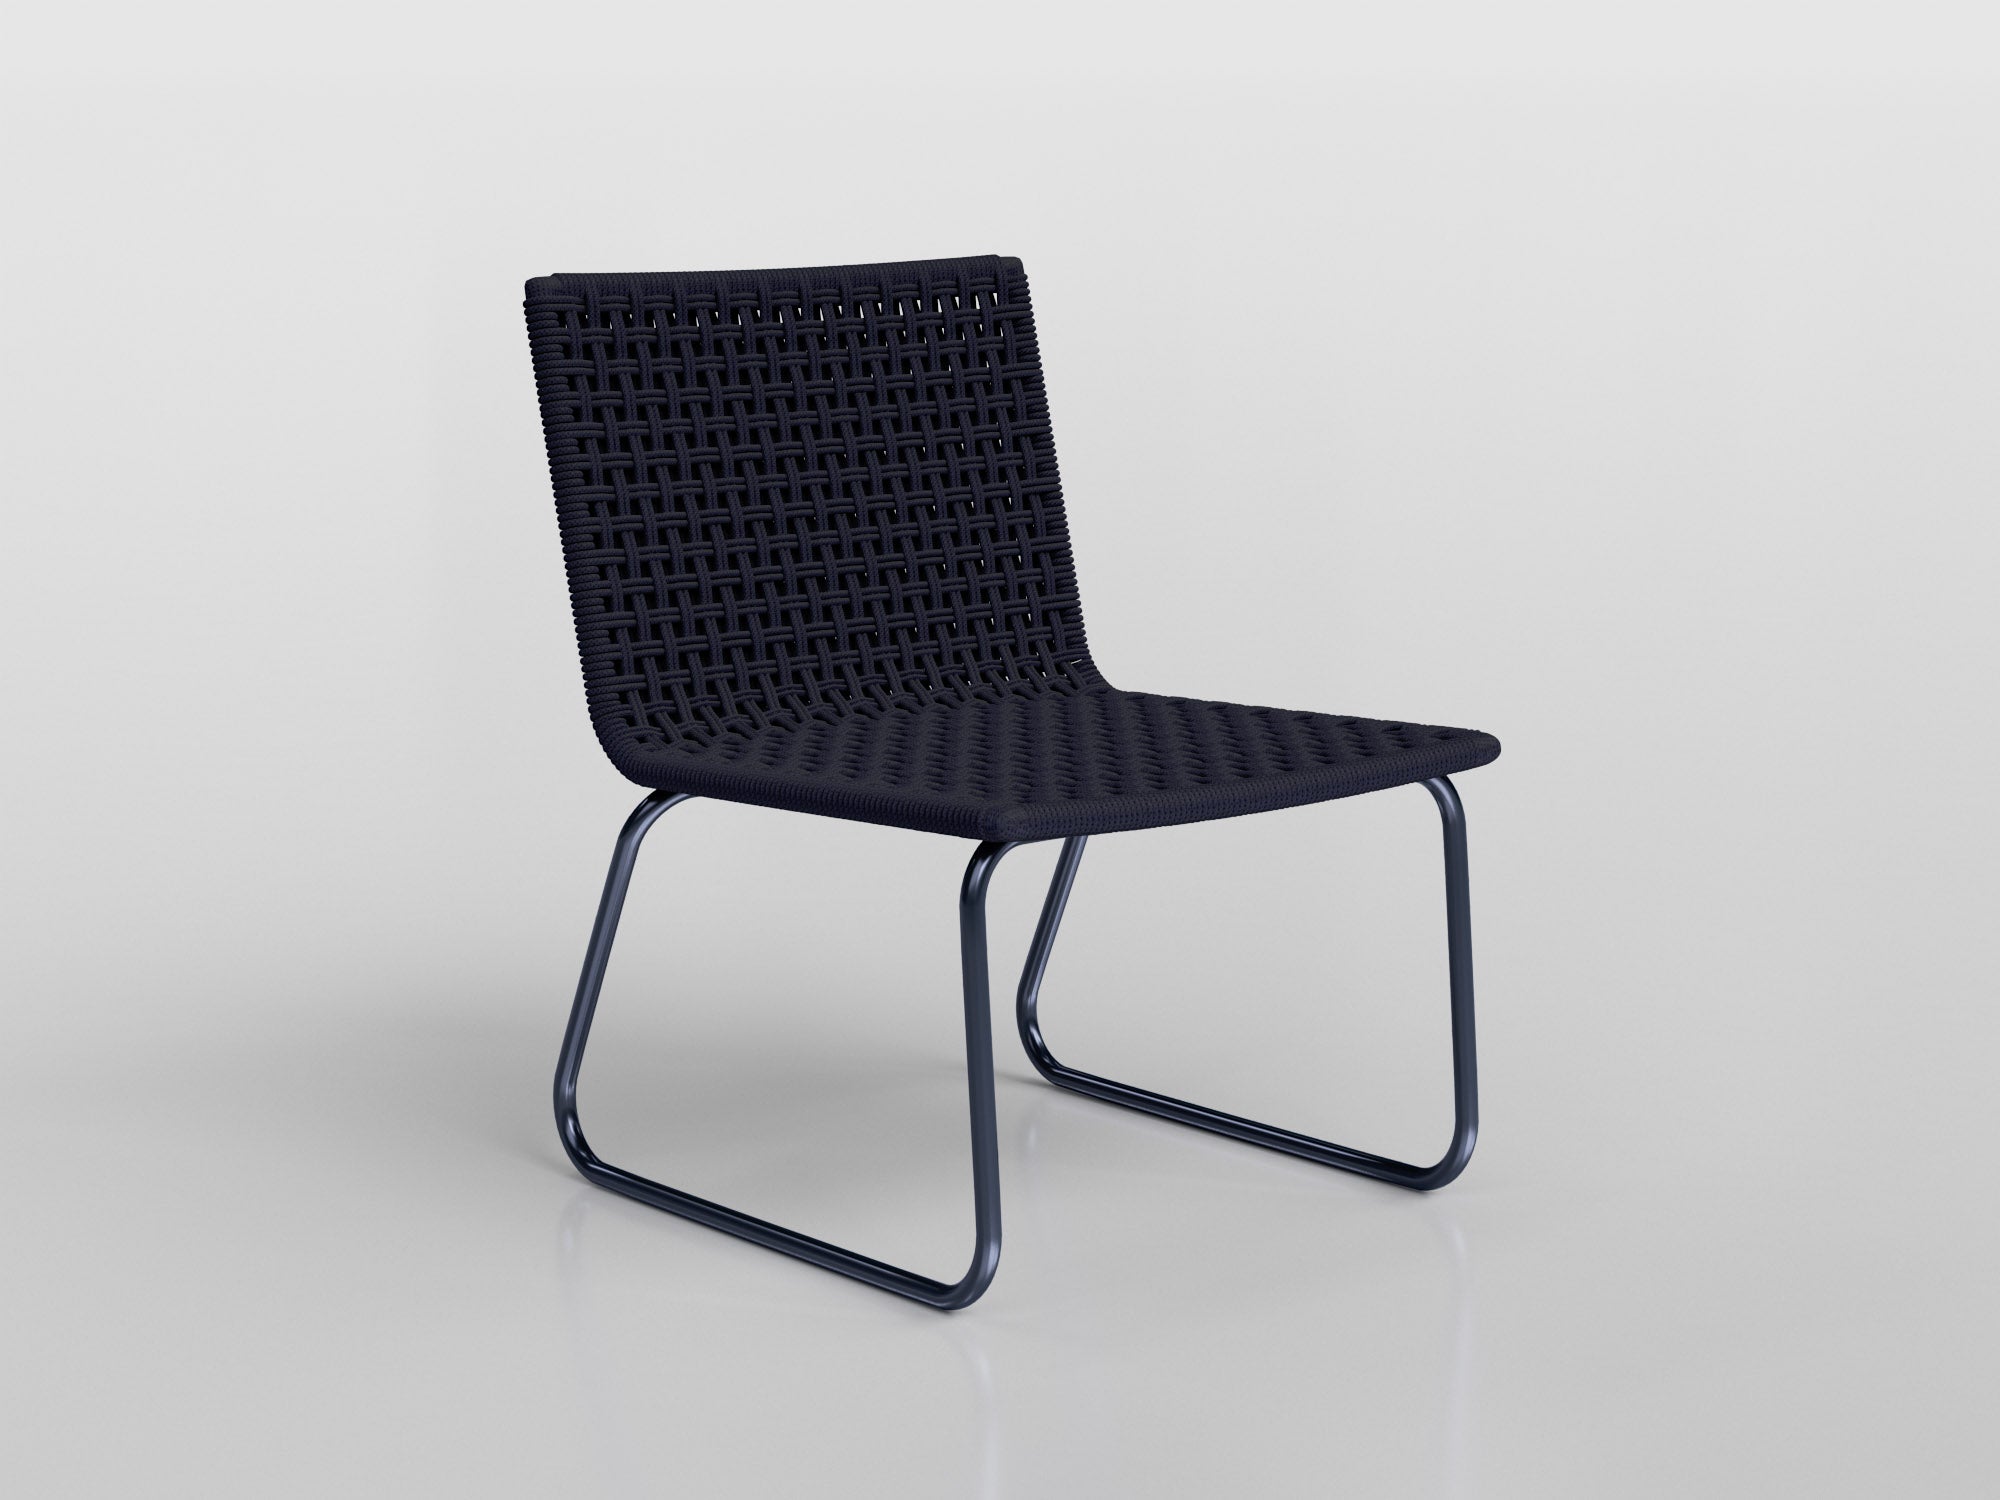 Marina Chair with aluminum estruture and nautical rope finishing, designed by Luciano Mandelli